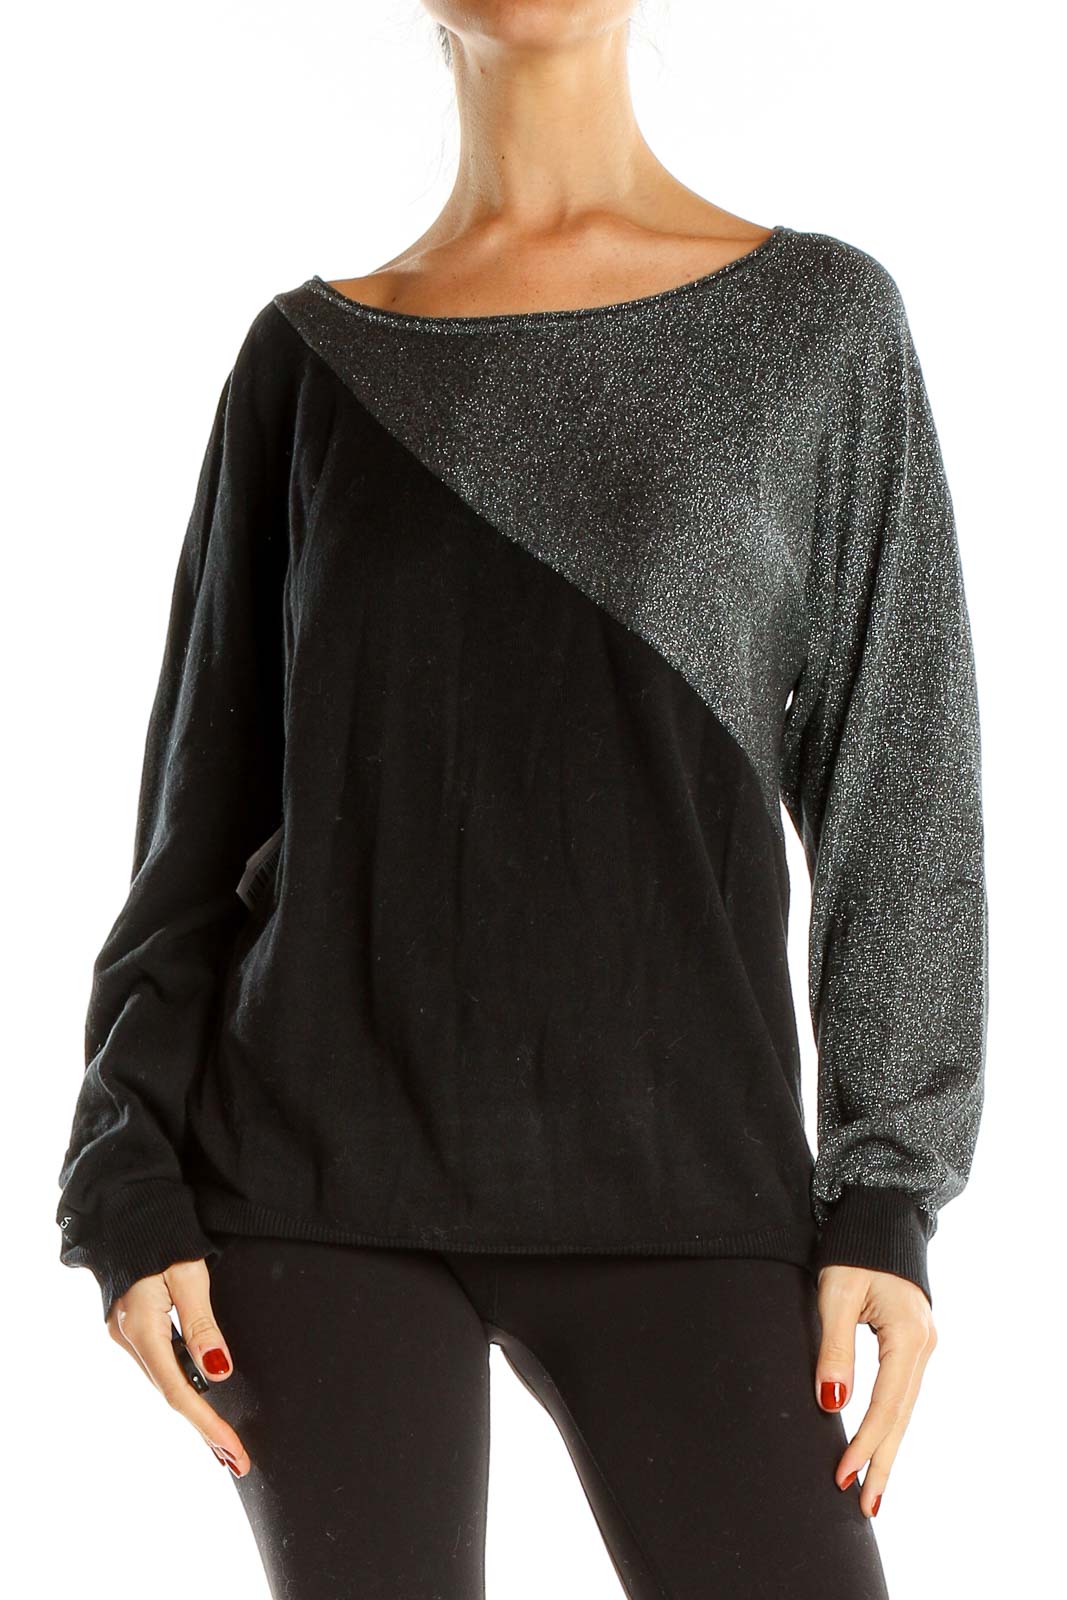 Black Gray Shimmer Colorblock Party Top Front